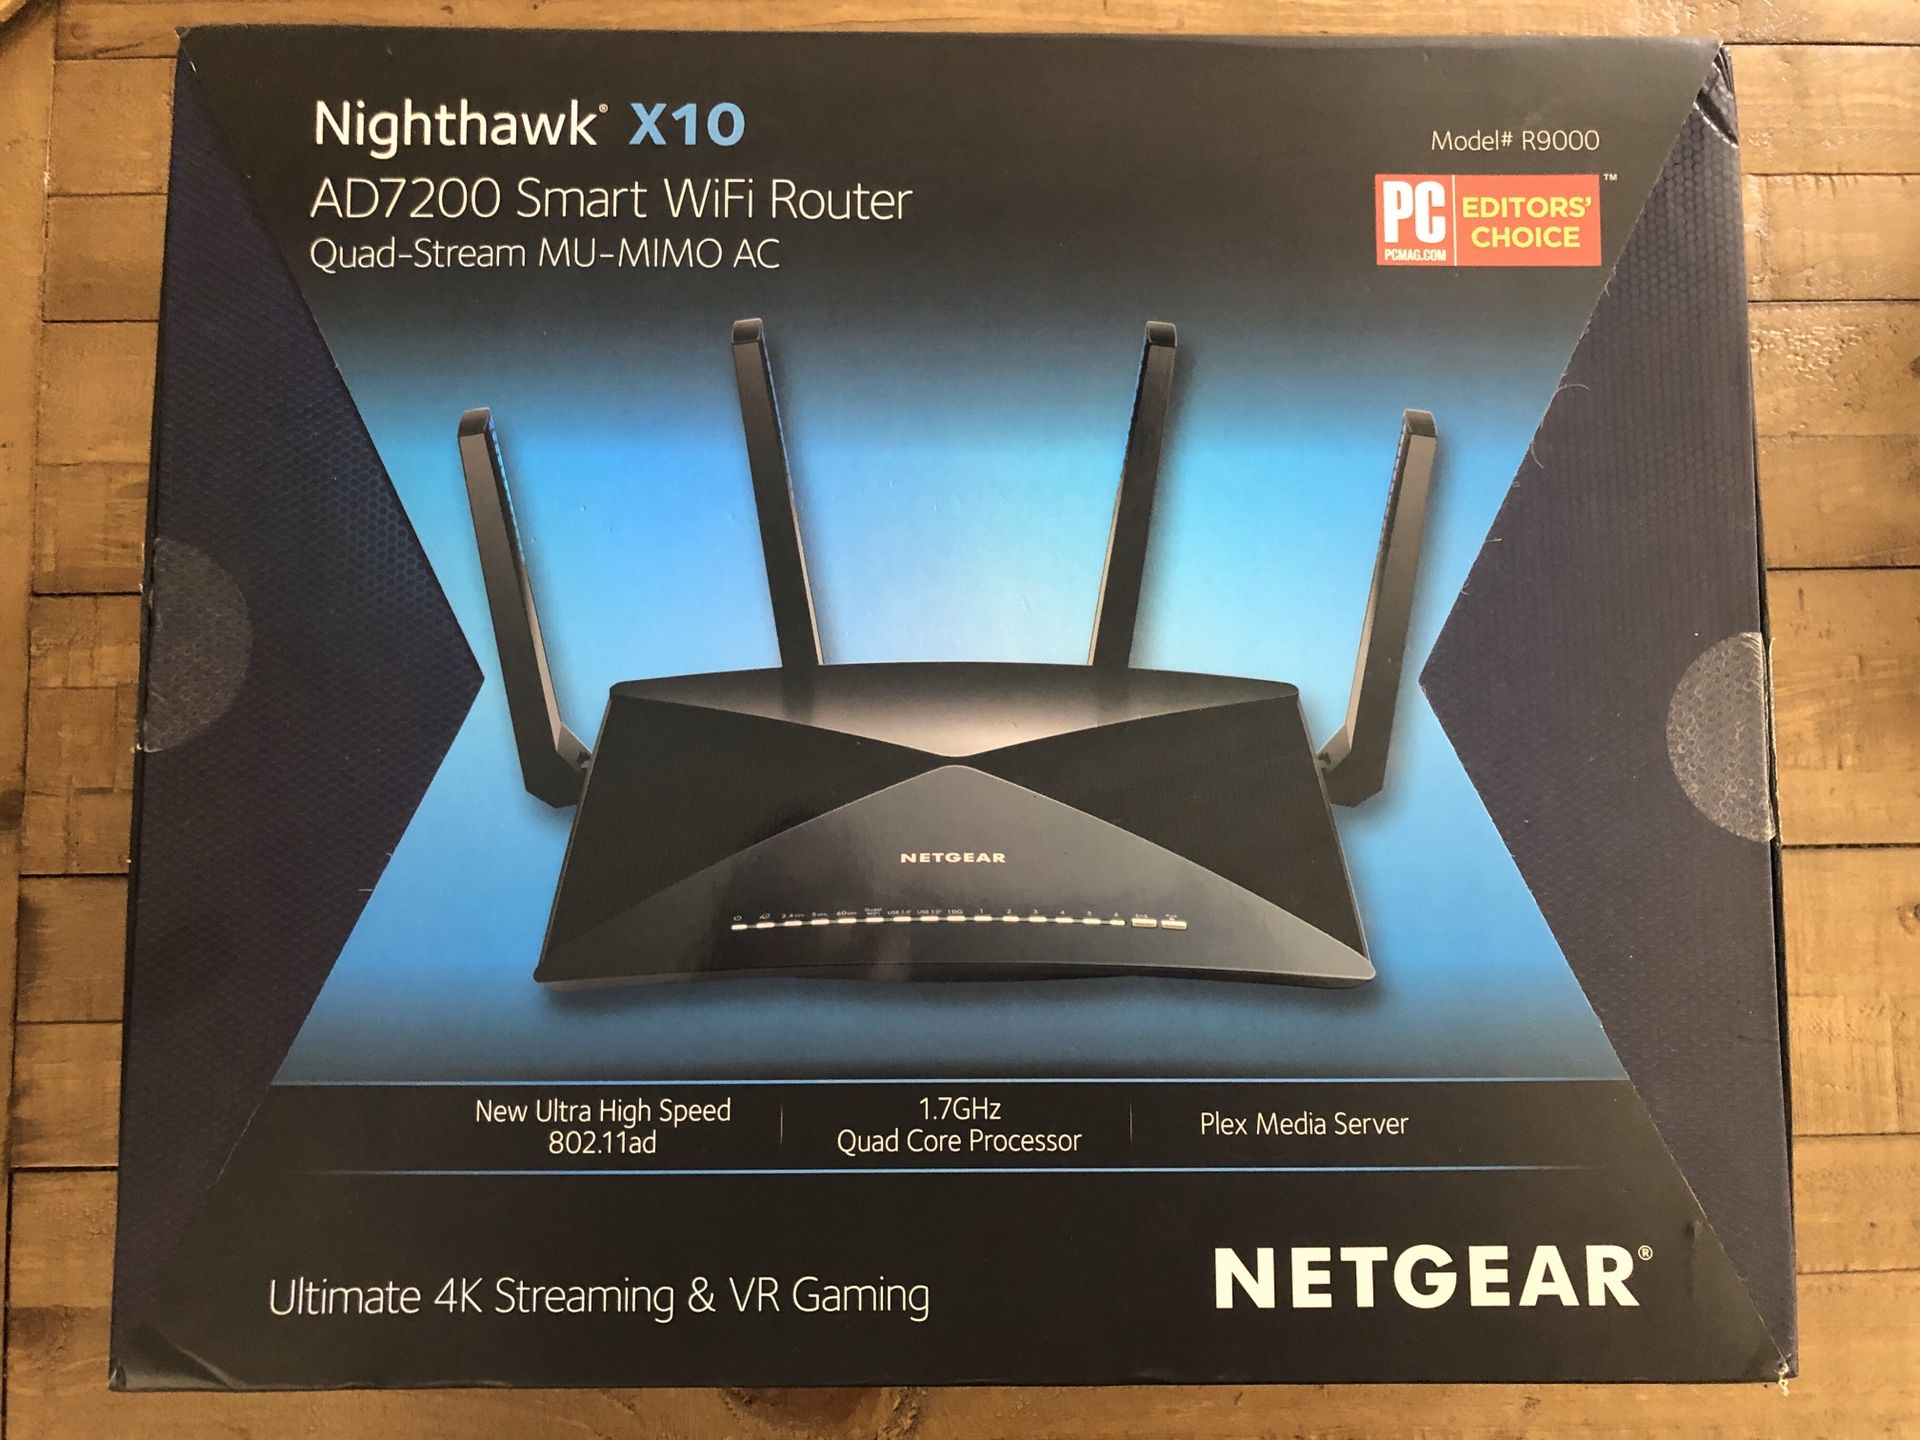 NETGEAR Nighthawk X10 R9000 Quad Core Router Open Box With Top Protective Wrap